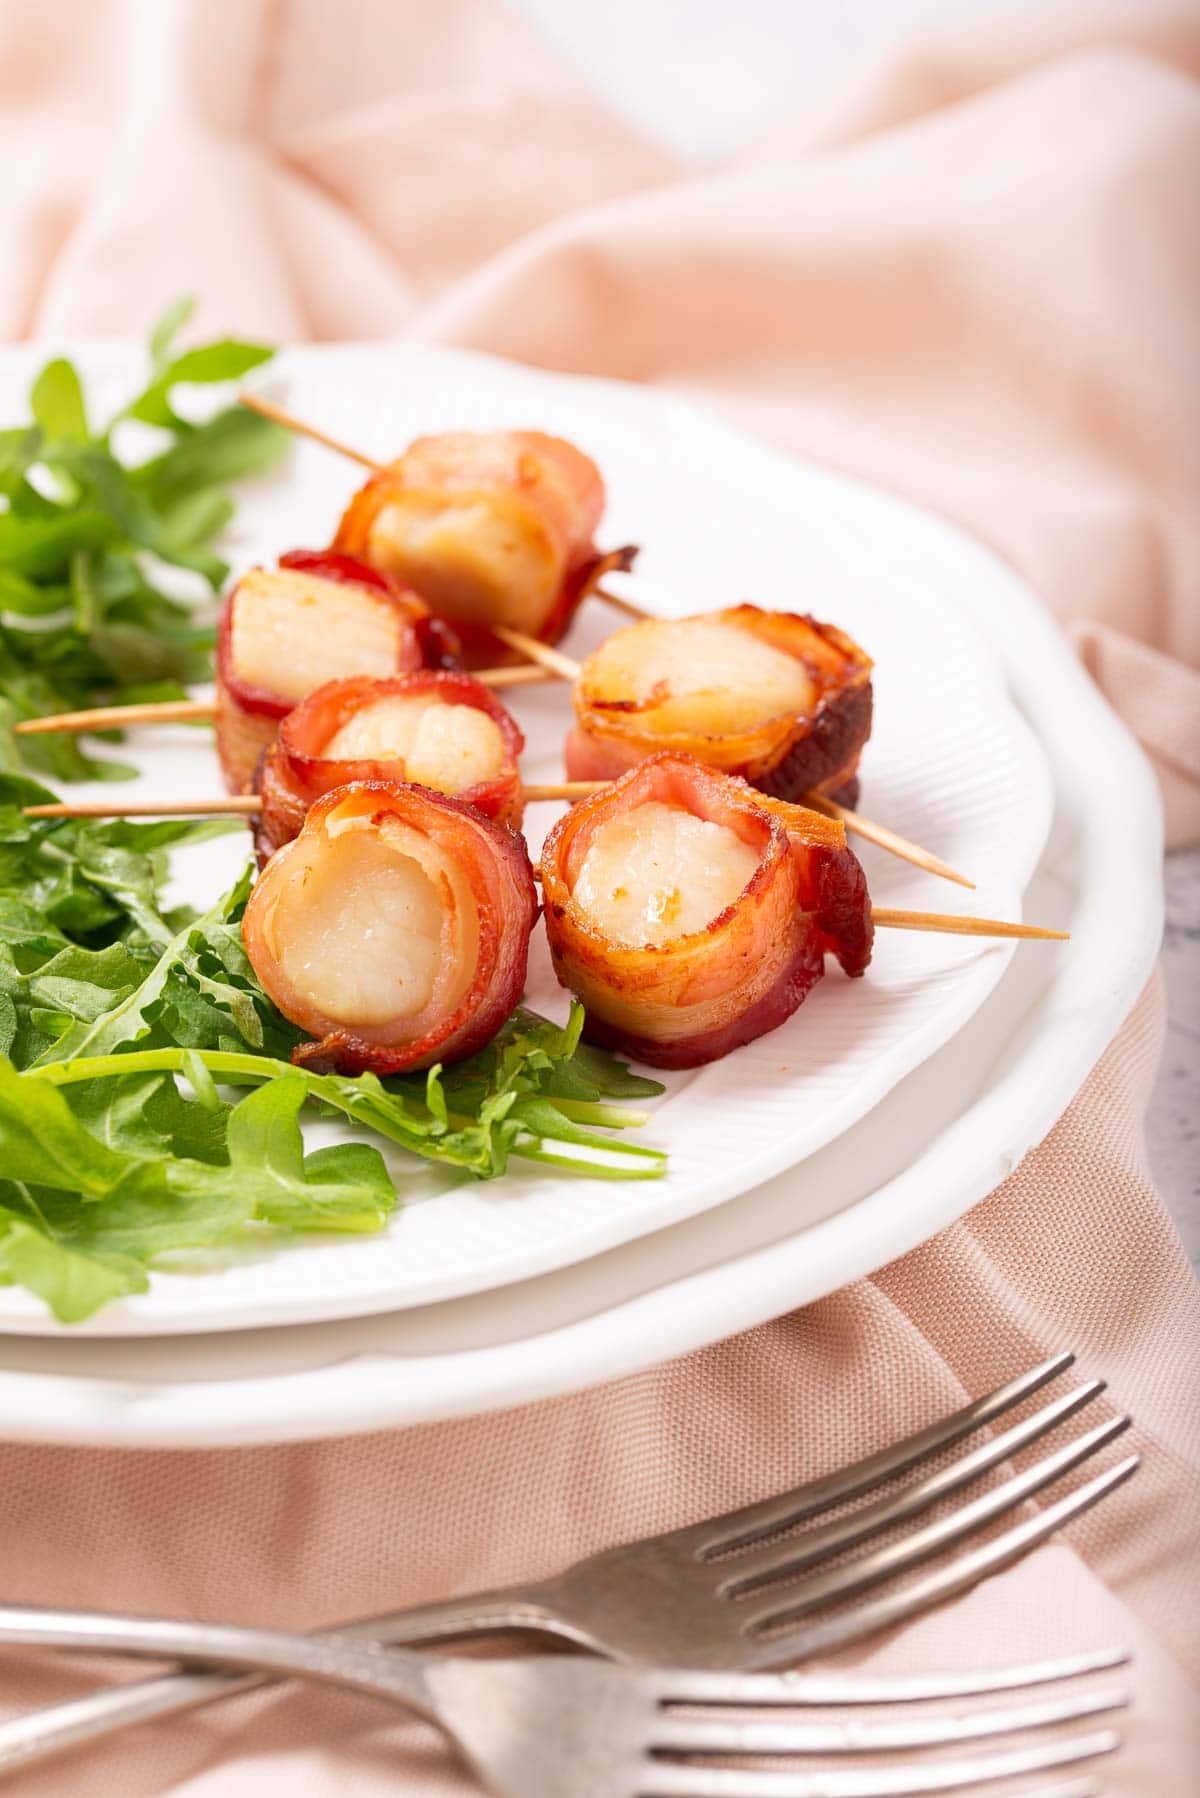 Bacon wrapped scallops on a bed of arugula